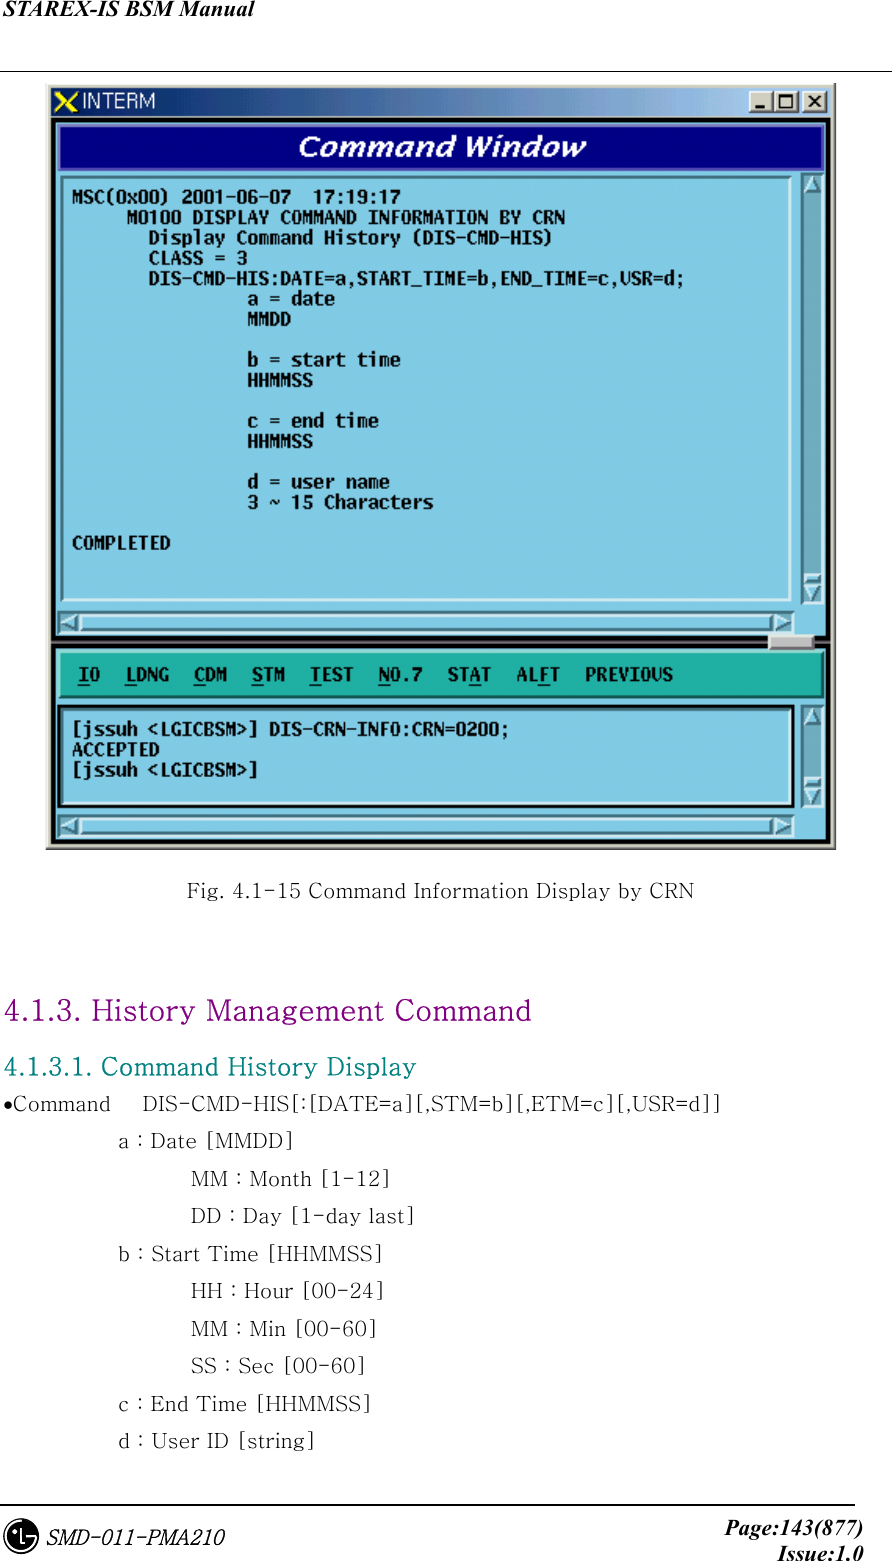 STAREX-IS BSM Manual     Page:143(877)Issue:1.0SMD-011-PMA210  Fig. 4.1-15 Command Information Display by CRN  4.1.3. History Management Command 4.1.3.1. Command History Display •Command   DIS-CMD-HIS[:[DATE=a][,STM=b][,ETM=c][,USR=d]]      a : Date [MMDD]          MM : Month [1-12]         DD : Day [1-day last]      b : Start Time [HHMMSS]         HH : Hour [00-24]         MM : Min [00-60]         SS : Sec [00-60]      c : End Time [HHMMSS]      d : User ID [string] 